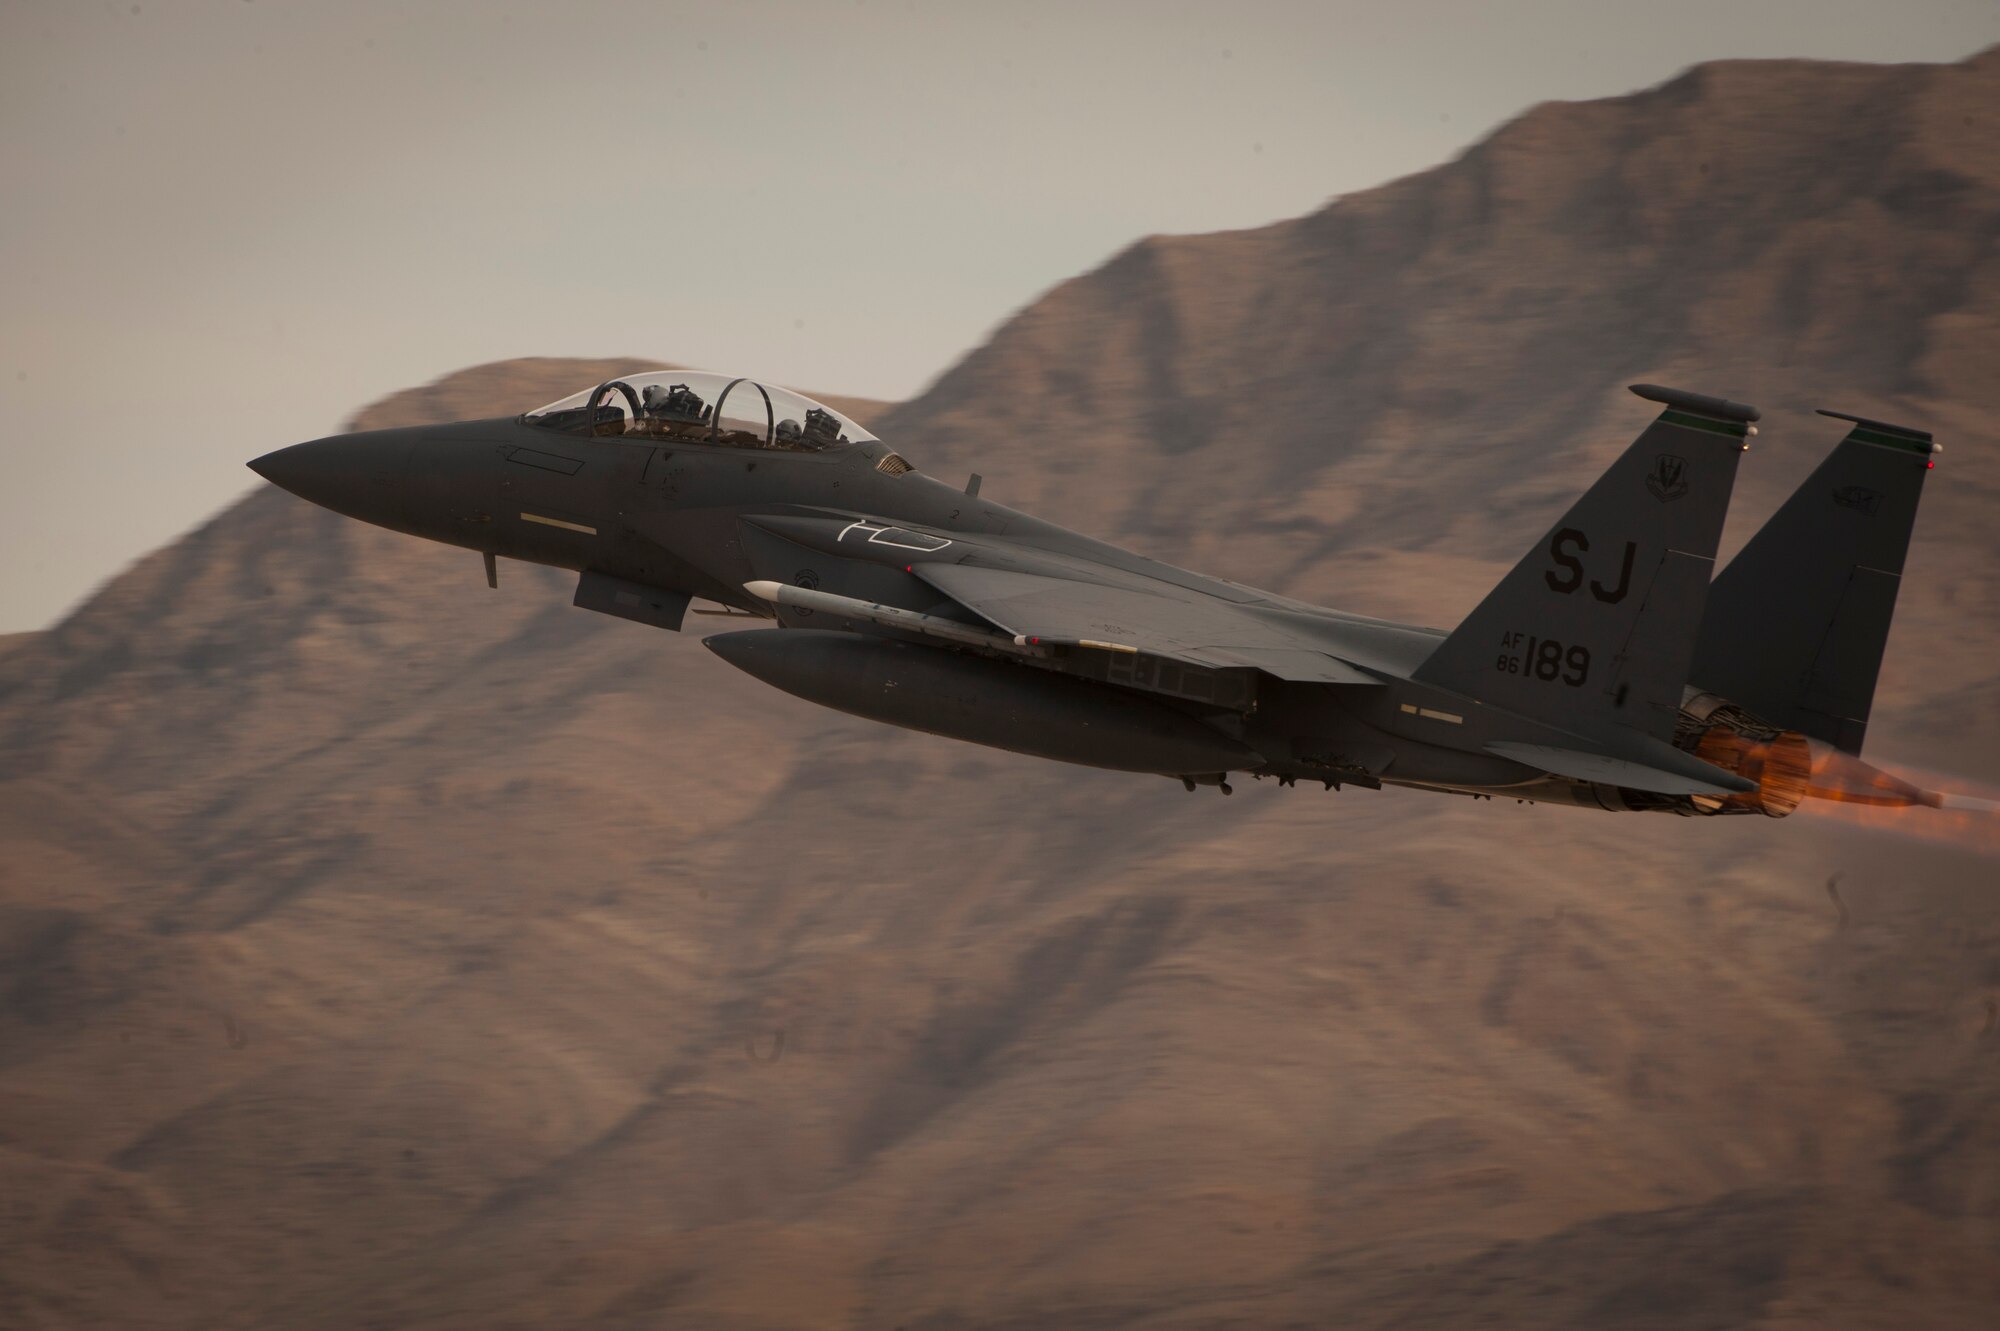 An F-15E Strike Eagle assigned to the 335th Fighter Squadron, Seymour Johnson Air Force Base, N.C., takes off from Nellis Air Force Base, Nev., to take part in a Red Flag 15-1 training sortie over the Nevada Test and Training Range Feb. 4, 2015. Various units from around the Air Force, joint branches and coalition partners converge on Nellis three to four times a year to take part in the exercise, which puts to test the participant force’s air, space, cyber and combat search and rescue capabilities. (U.S. Air Force photo by Airman 1st Class Joshua Kleinholz)